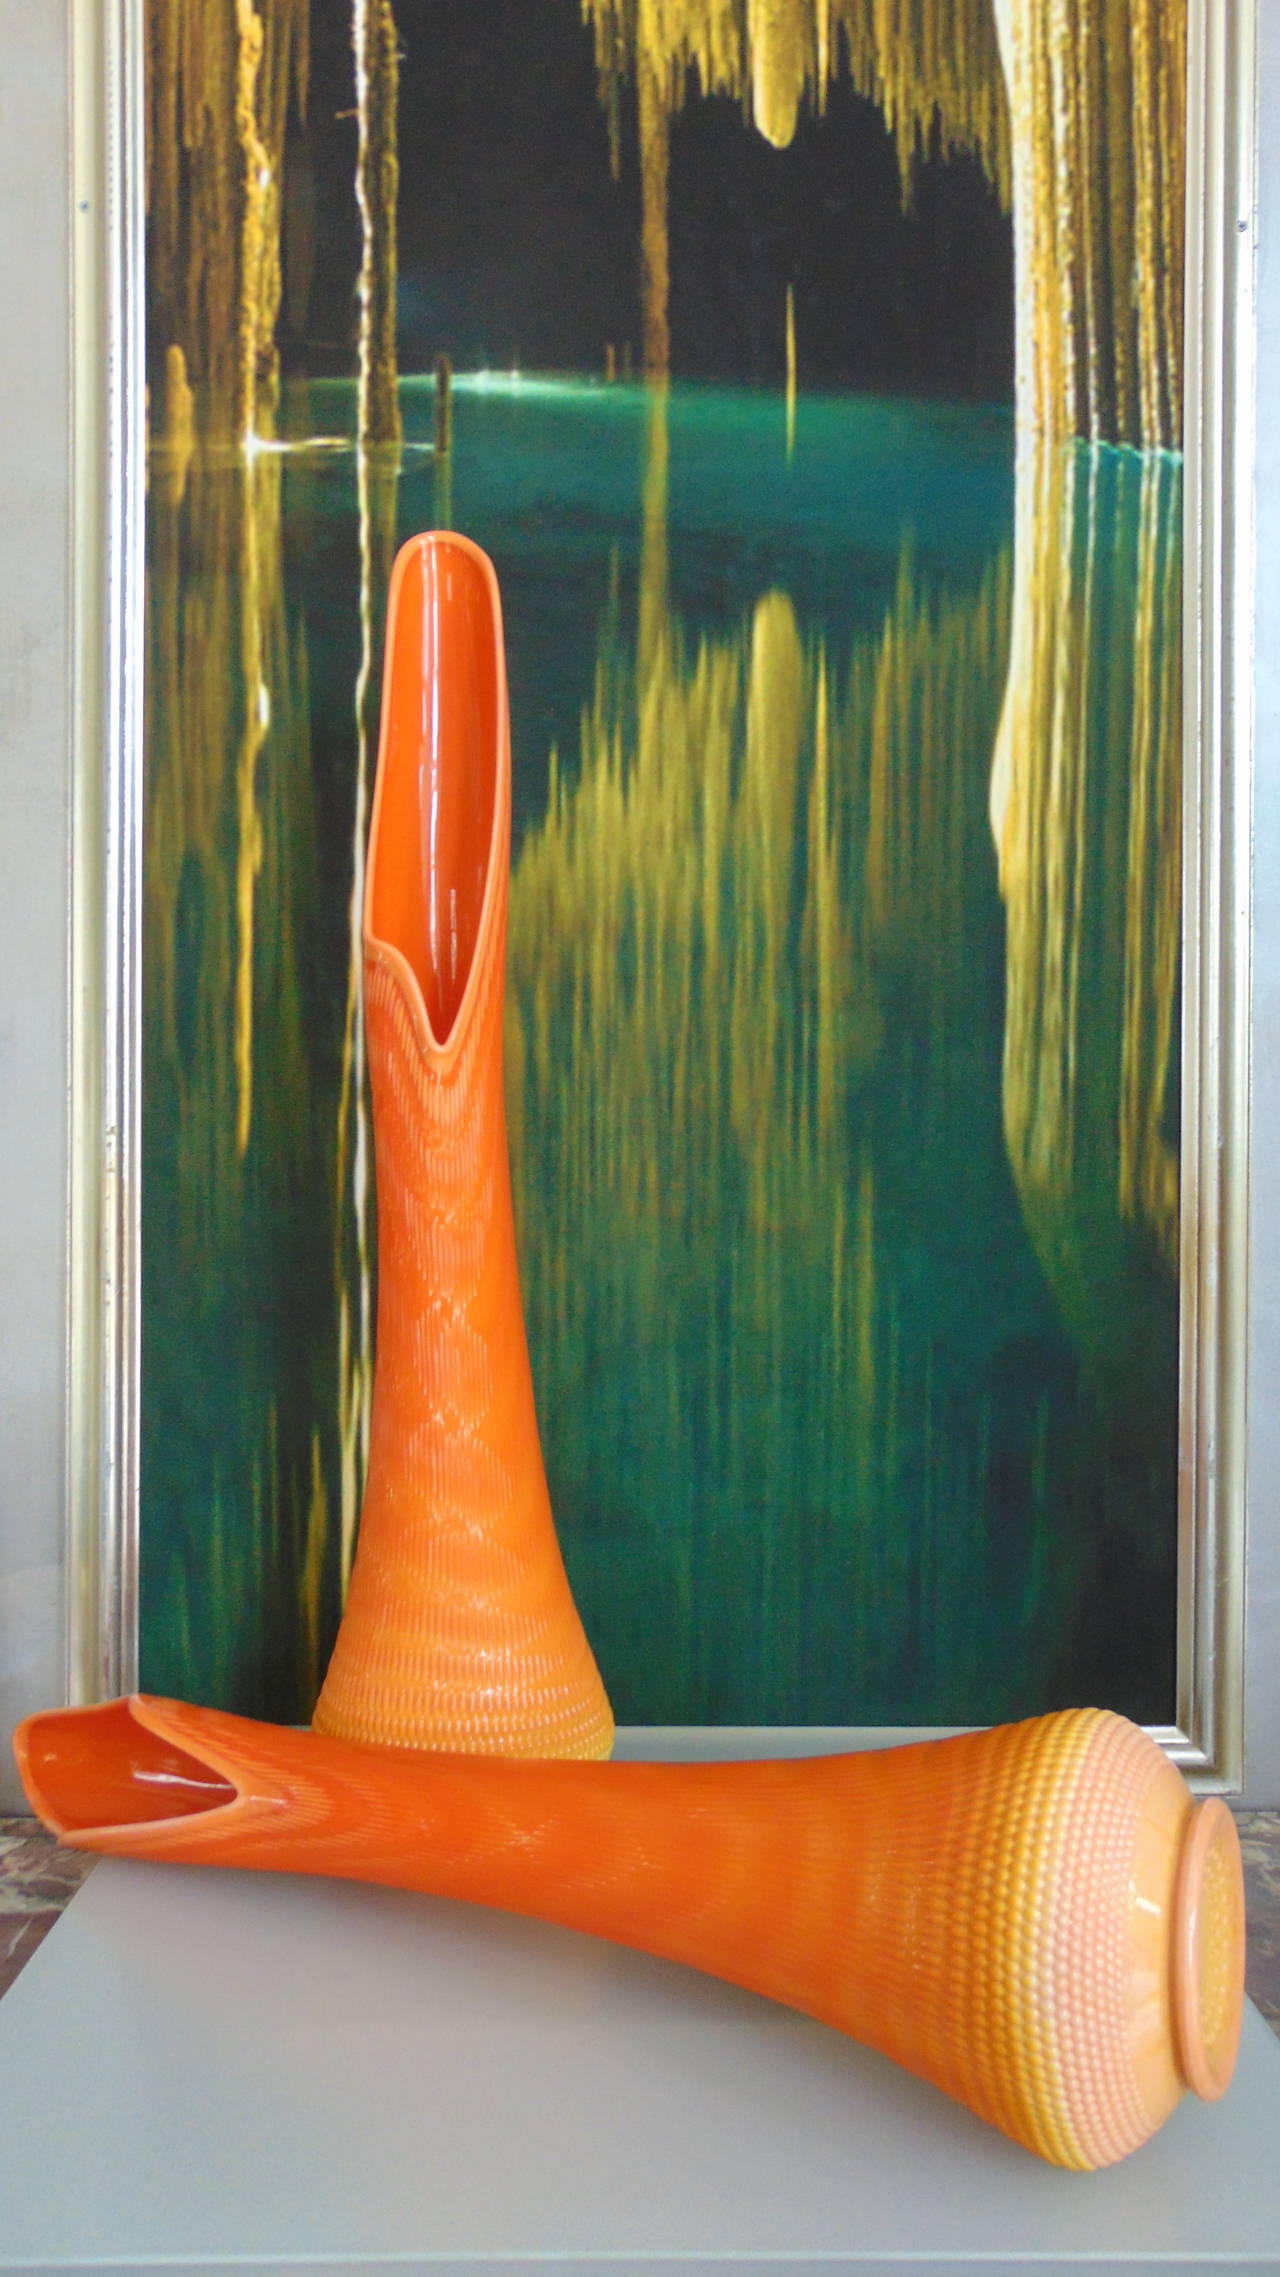 A rare monumental pair of Venetian style glass vases, circa 1970. 
This bright orange/yellow pair of vases has a wonderful unique opening, with the appearance of melted glass. 
They are 36